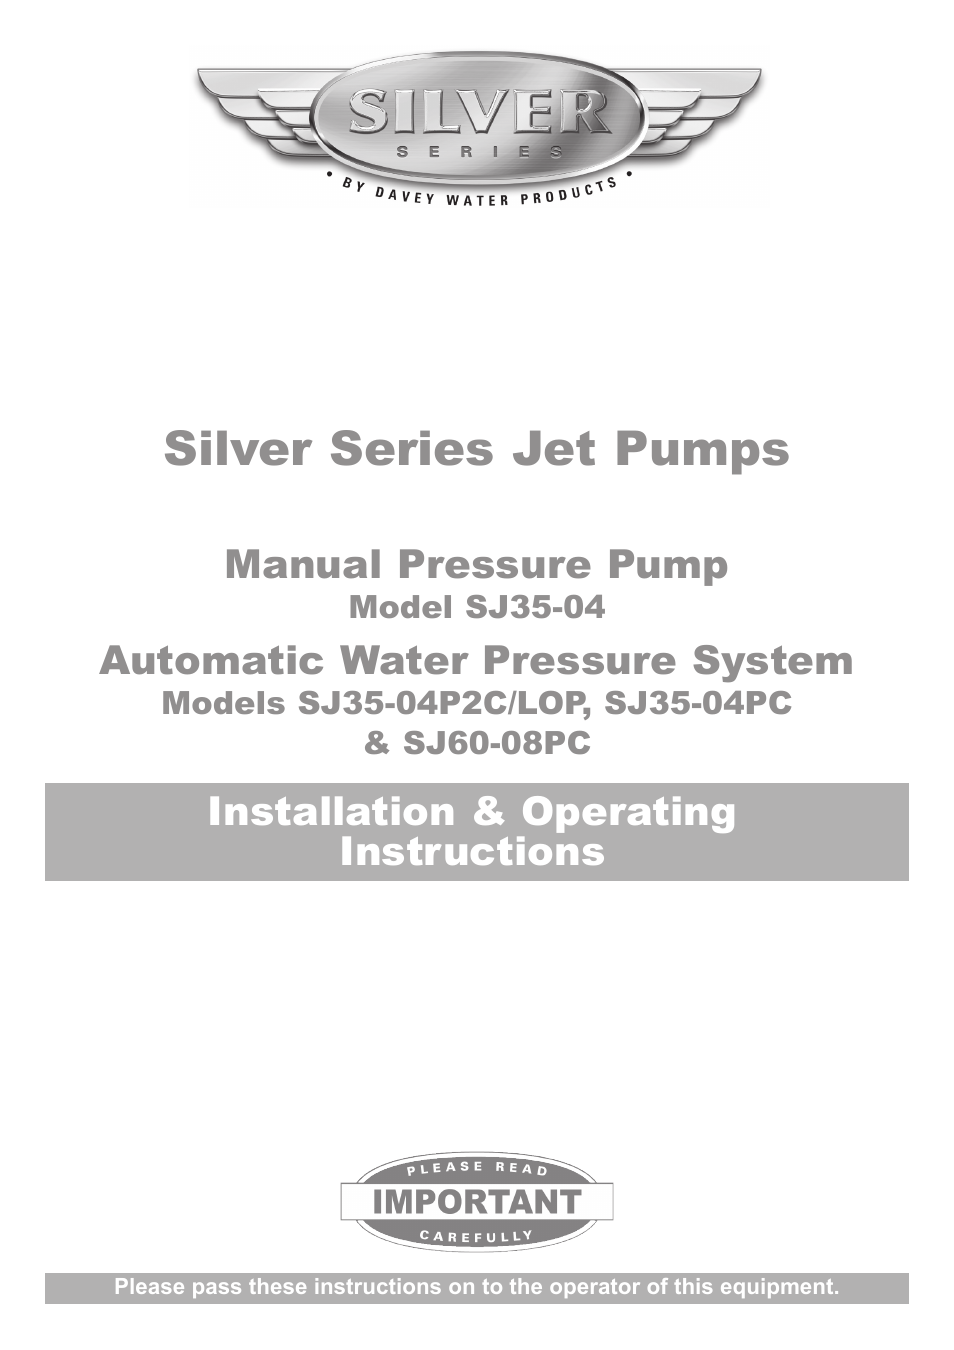 SJ35-04PC Automatic Water Pressure System